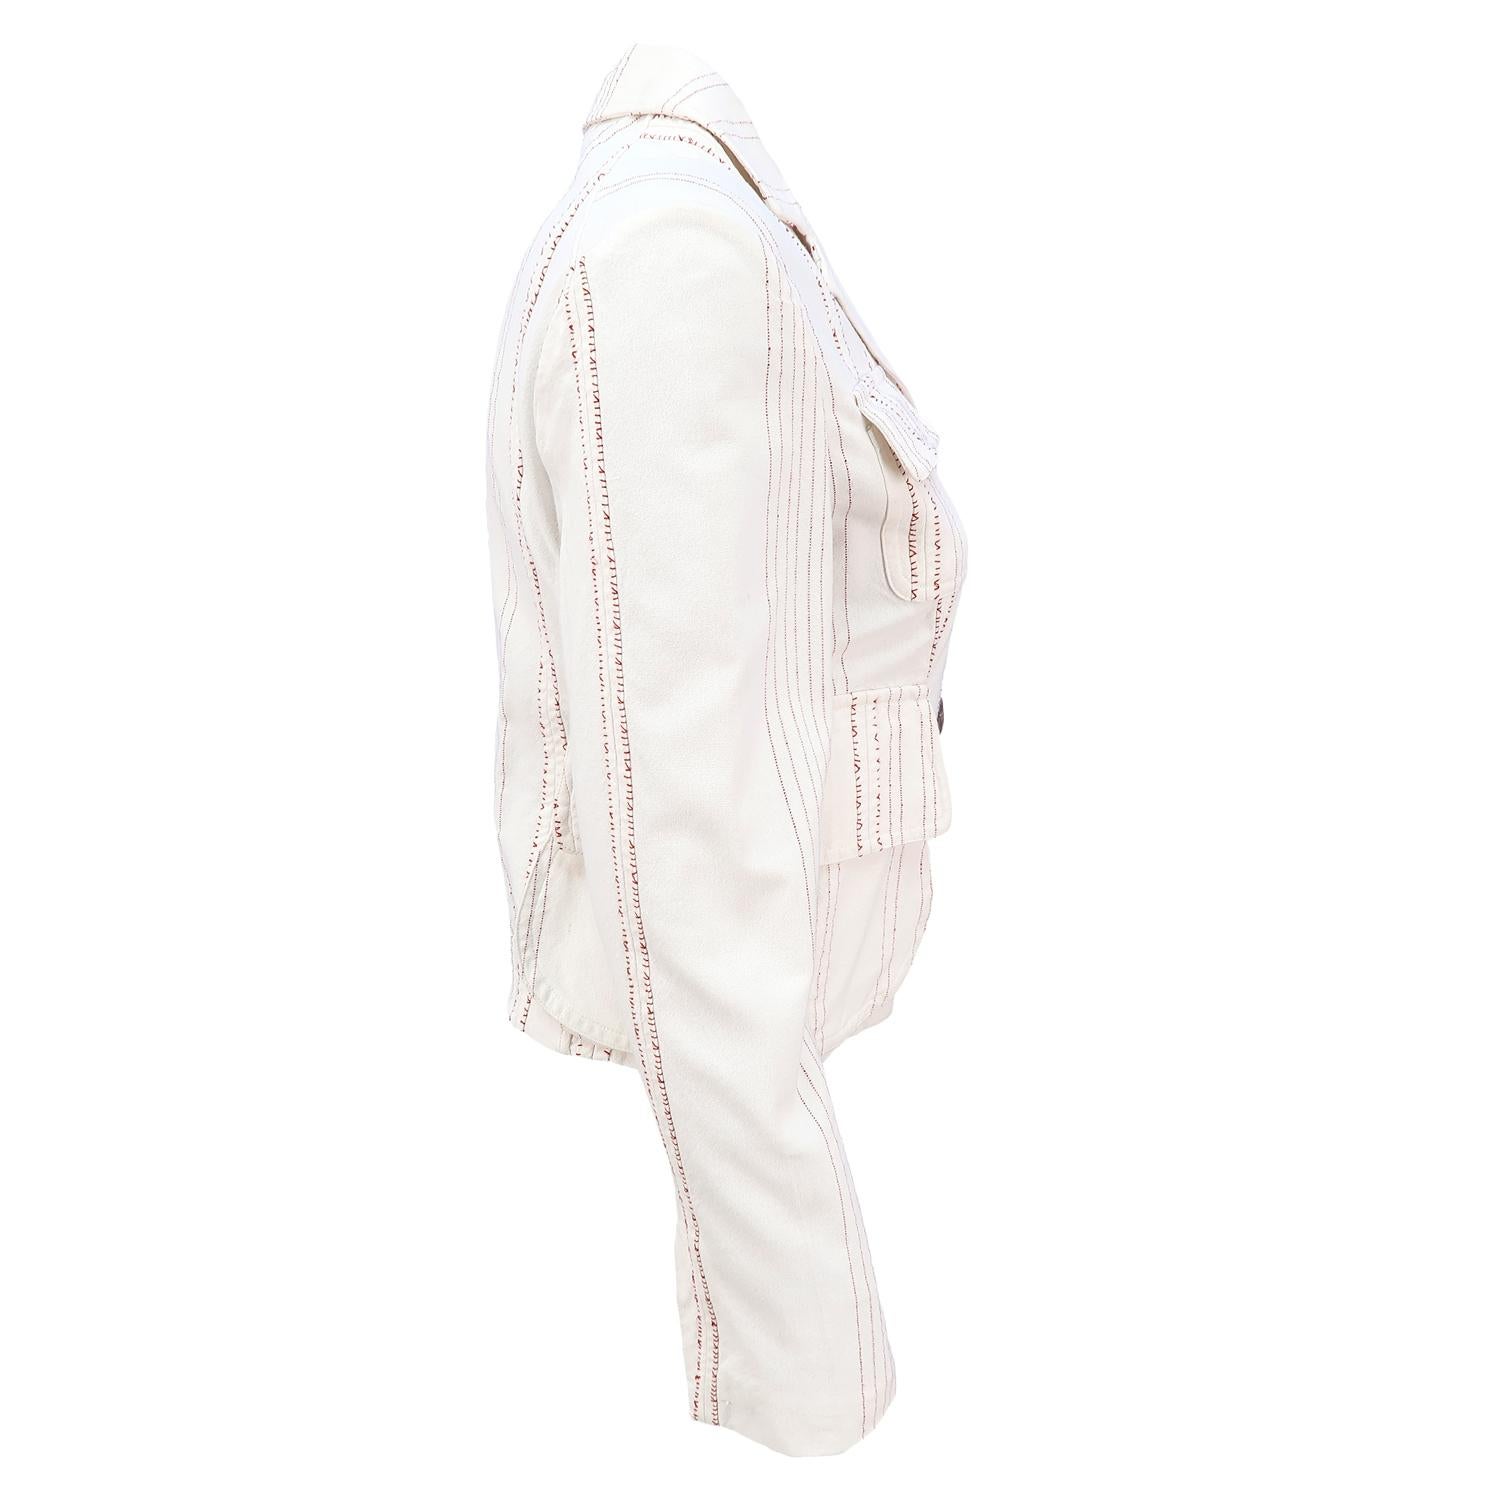 Marni by Consuelo Castiglioni SS-2003 Embroidered Cotton Cropped Jacket In Excellent Condition In Brussels, BE